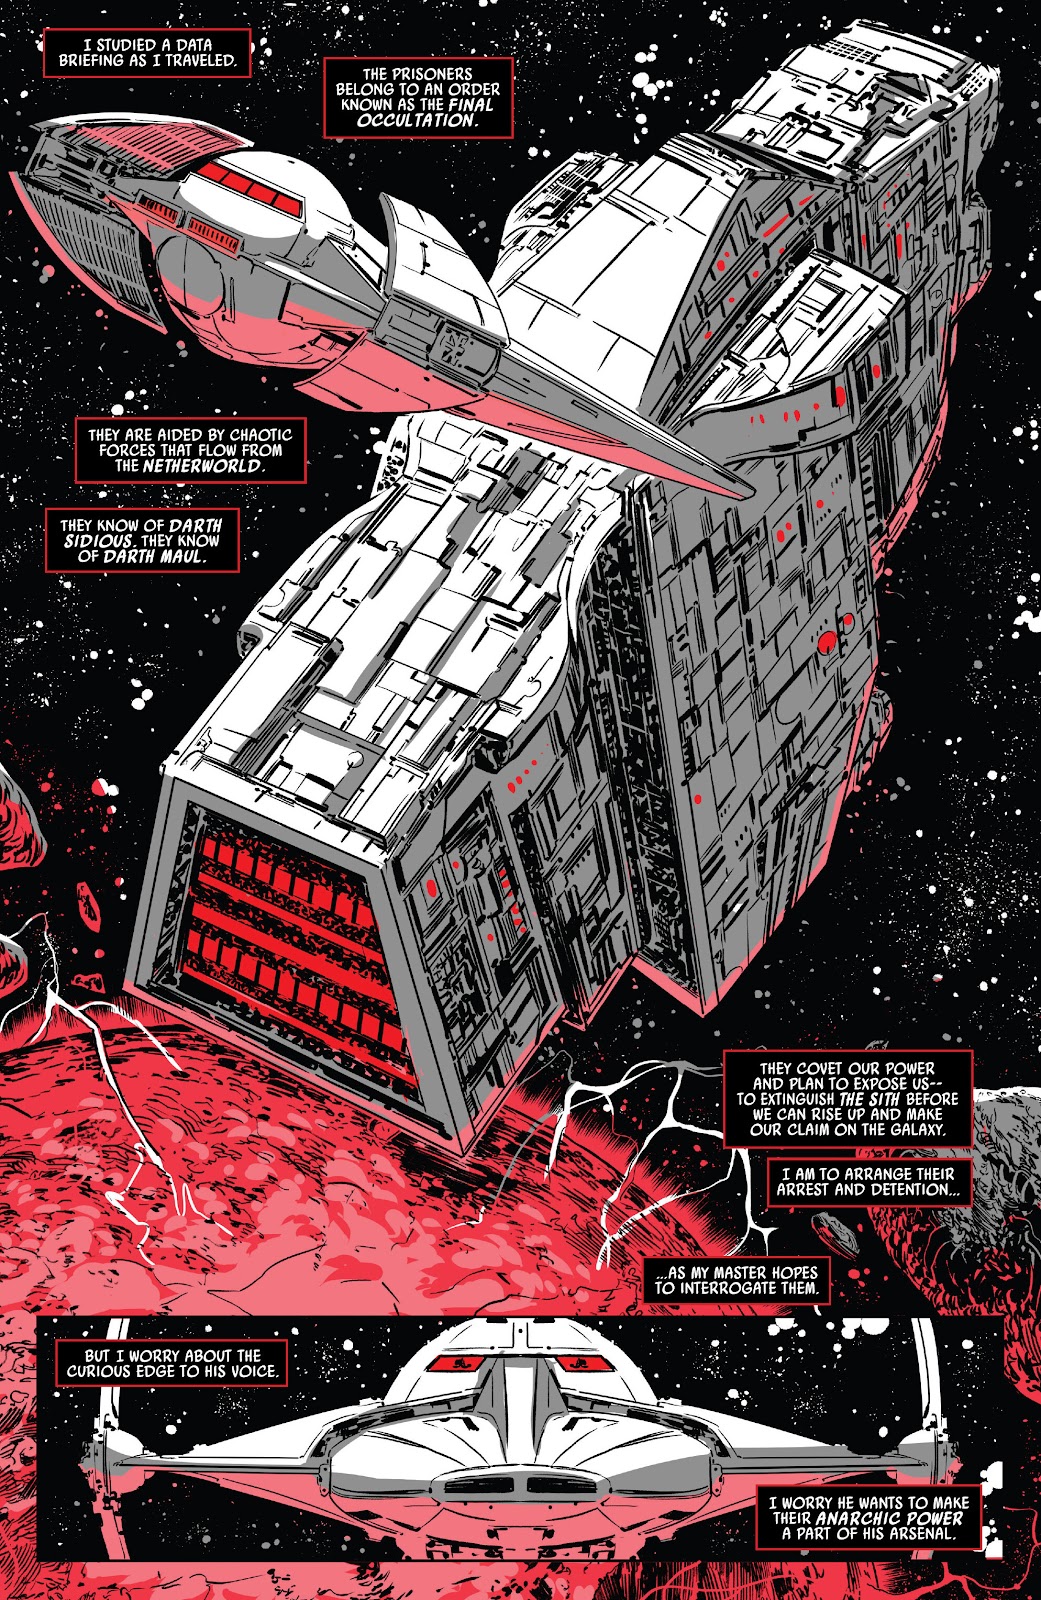 Star Wars: Darth Maul - Black, White & Red issue 1 - Page 6